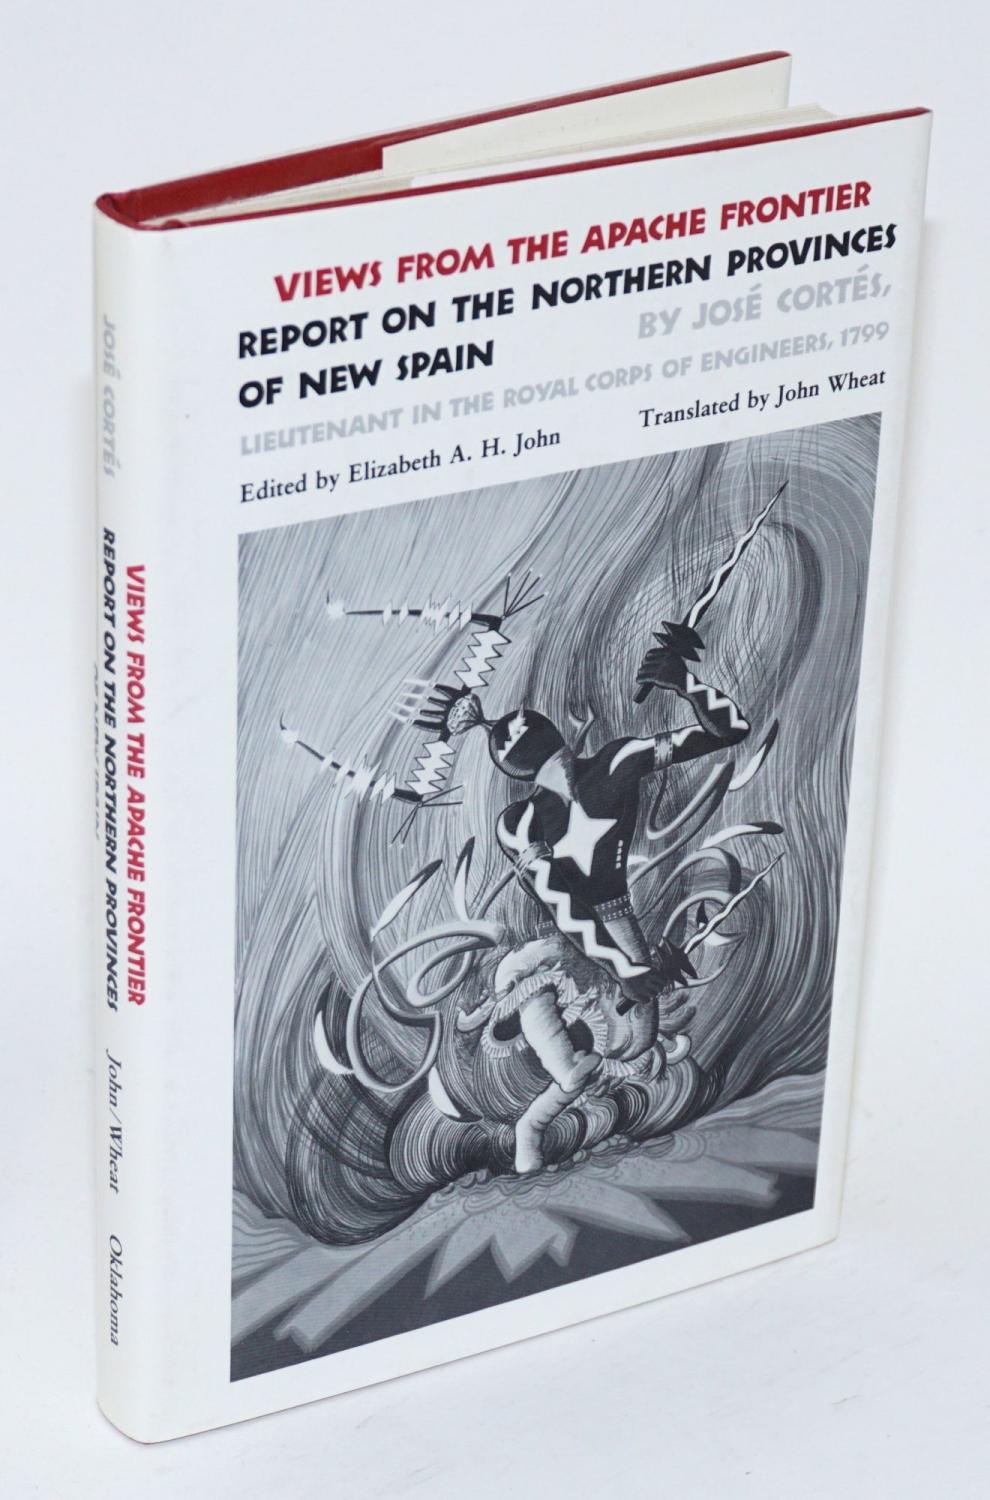 Views from the Apache frontier; report on the northern provinces of New Spain - Cortés, José, edited by Elizabeth A. H. John, translated by John Wheat